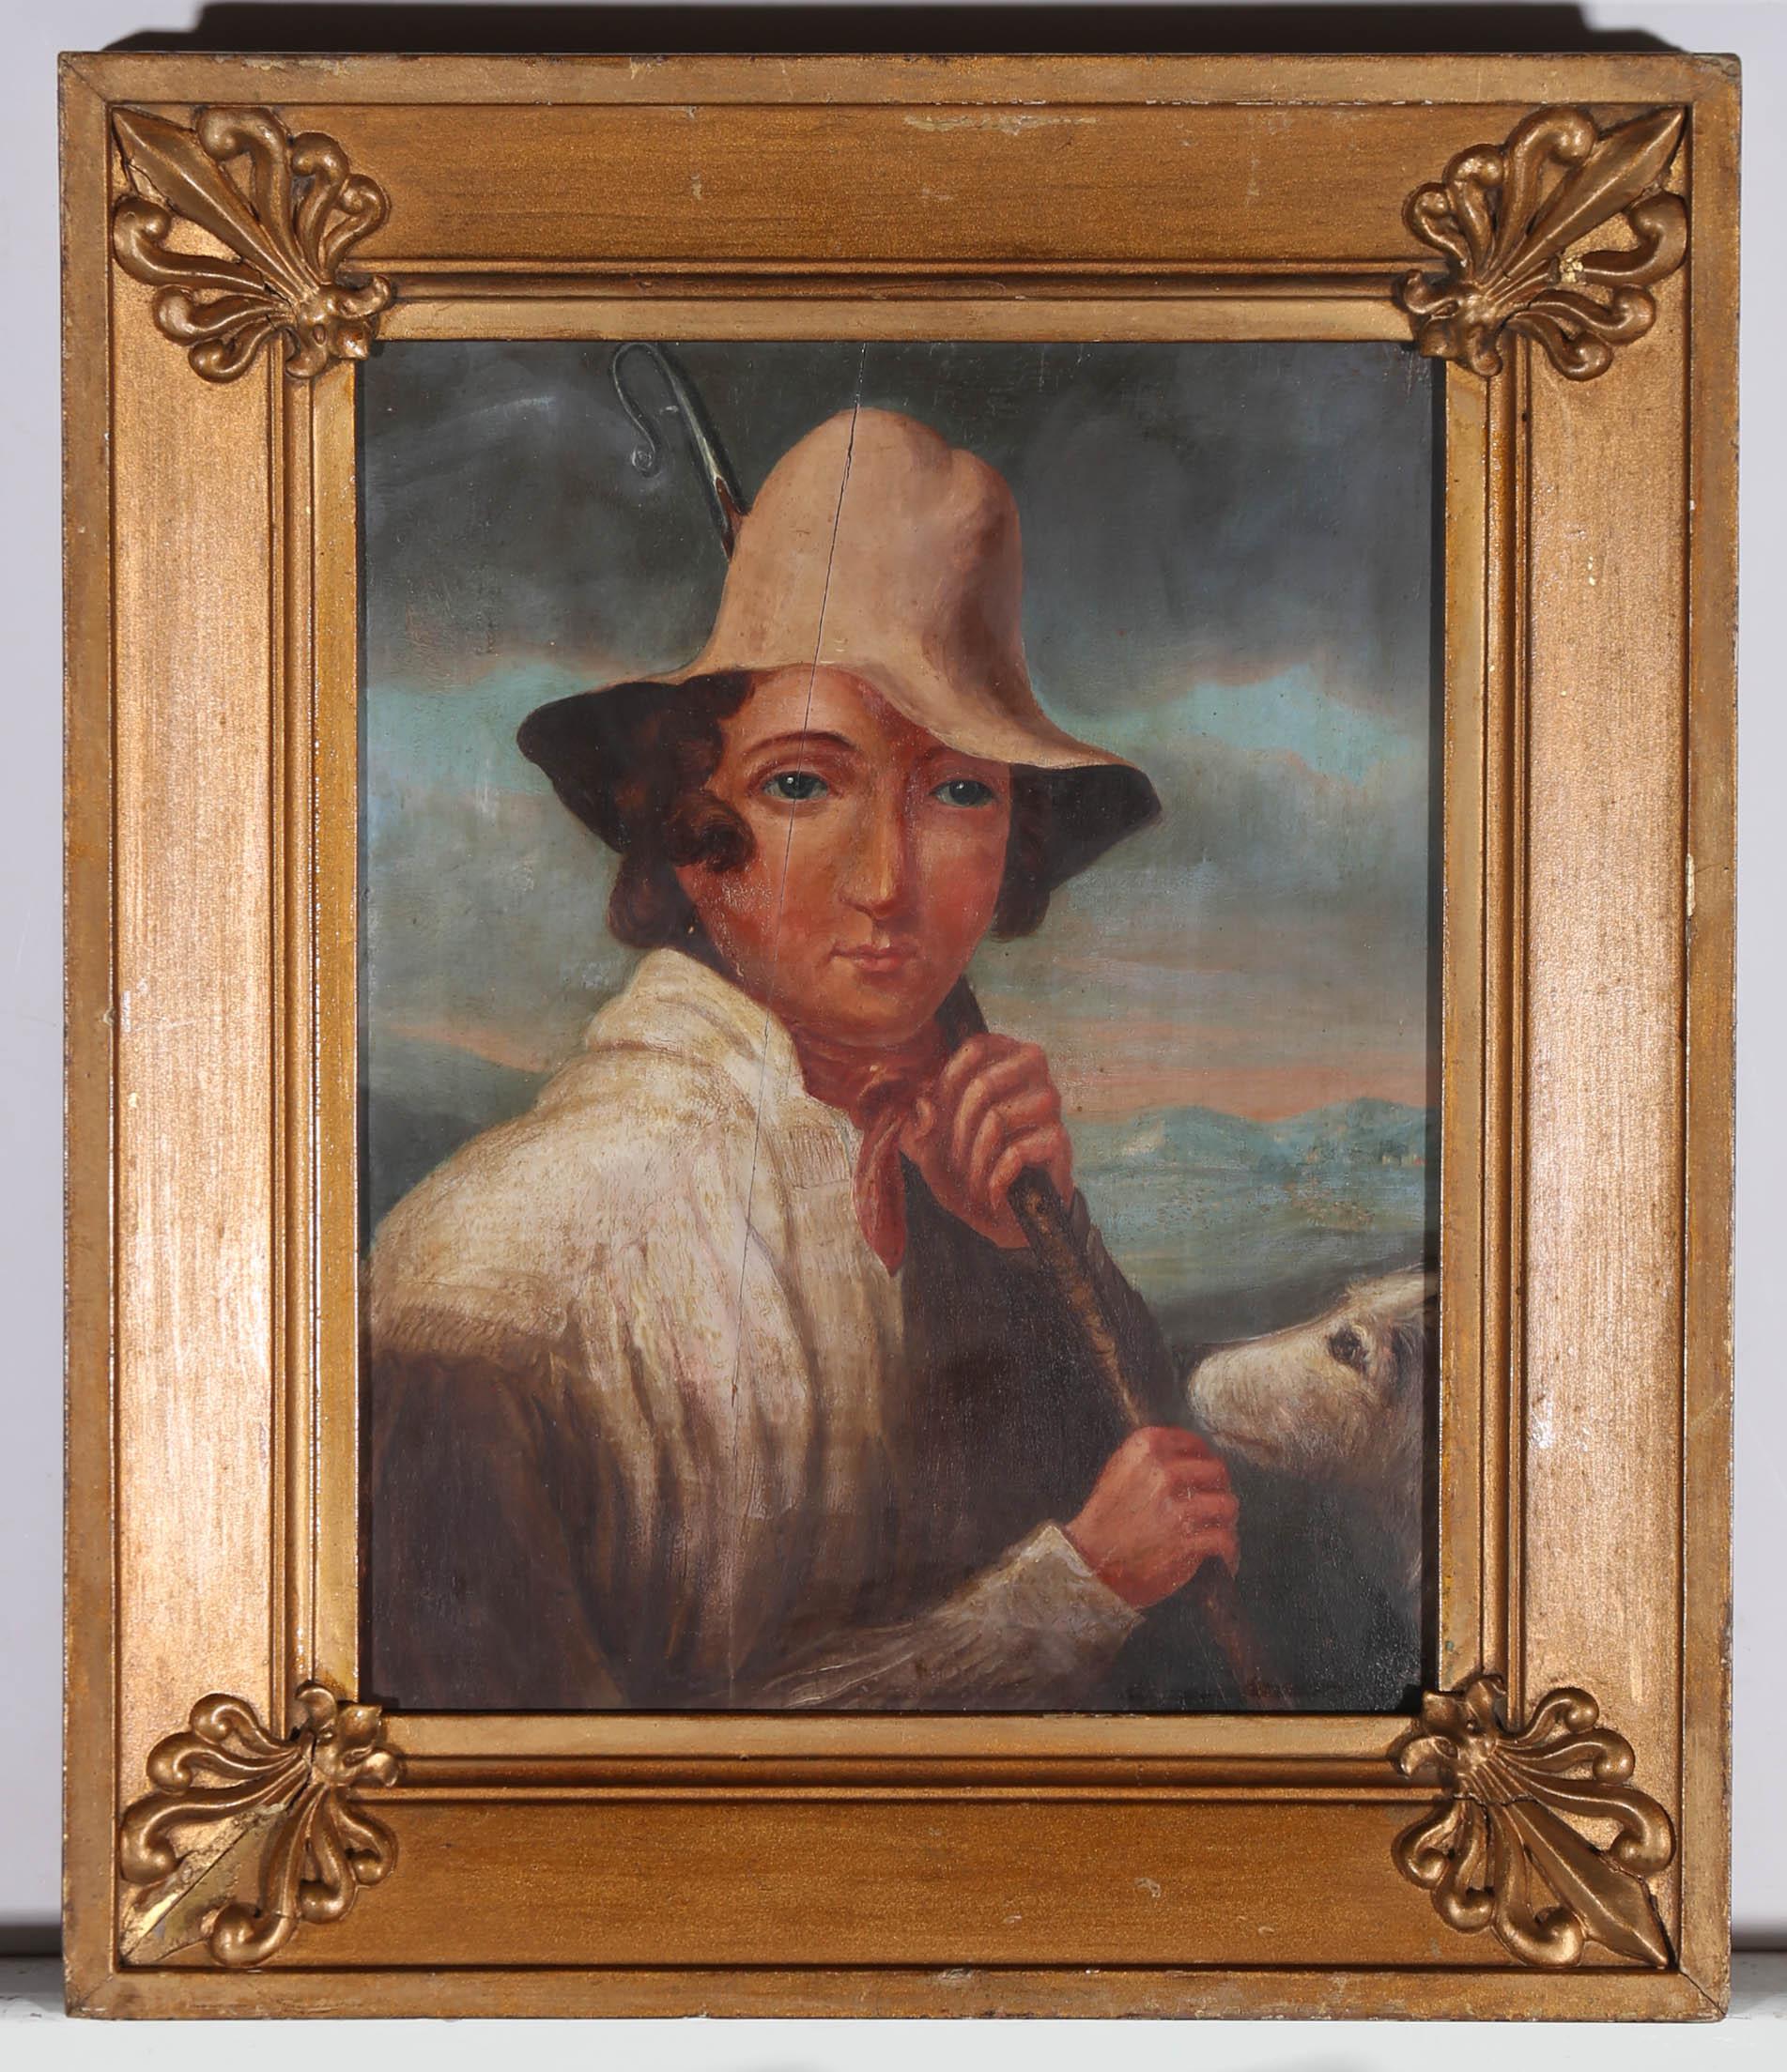 A charming early 19th century folk art portrait in oil, showing a young shepherd alongside his loyal dog and trusted crook in a highland landscape. The sitter is wearing his every day attire, including a shepherd's hat and neckerchief, and is